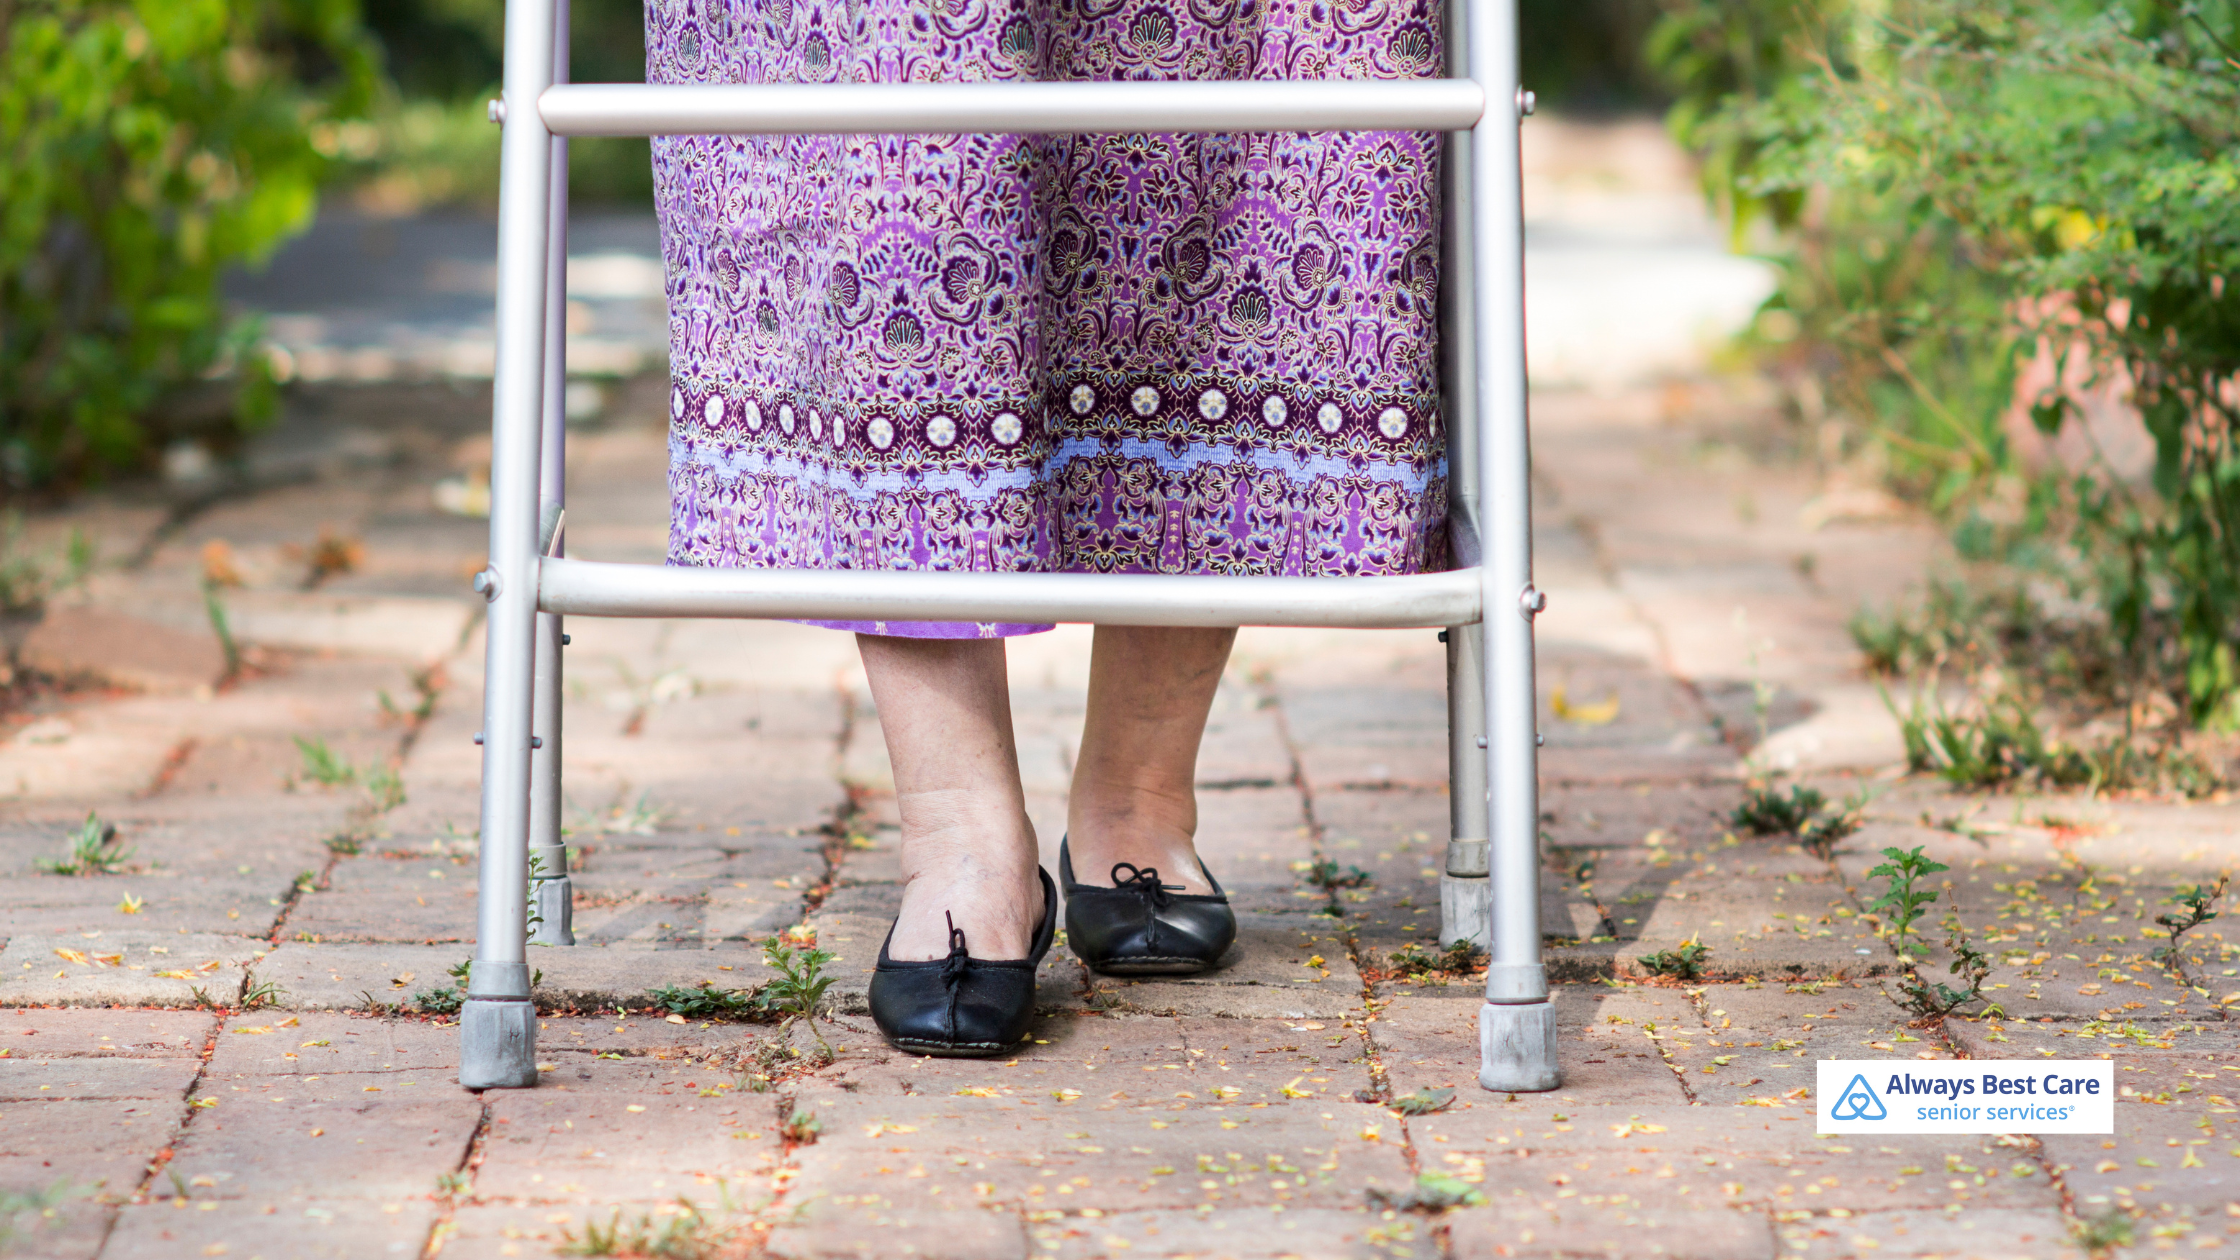 On Your Feet: Common Foot Problems for Seniors